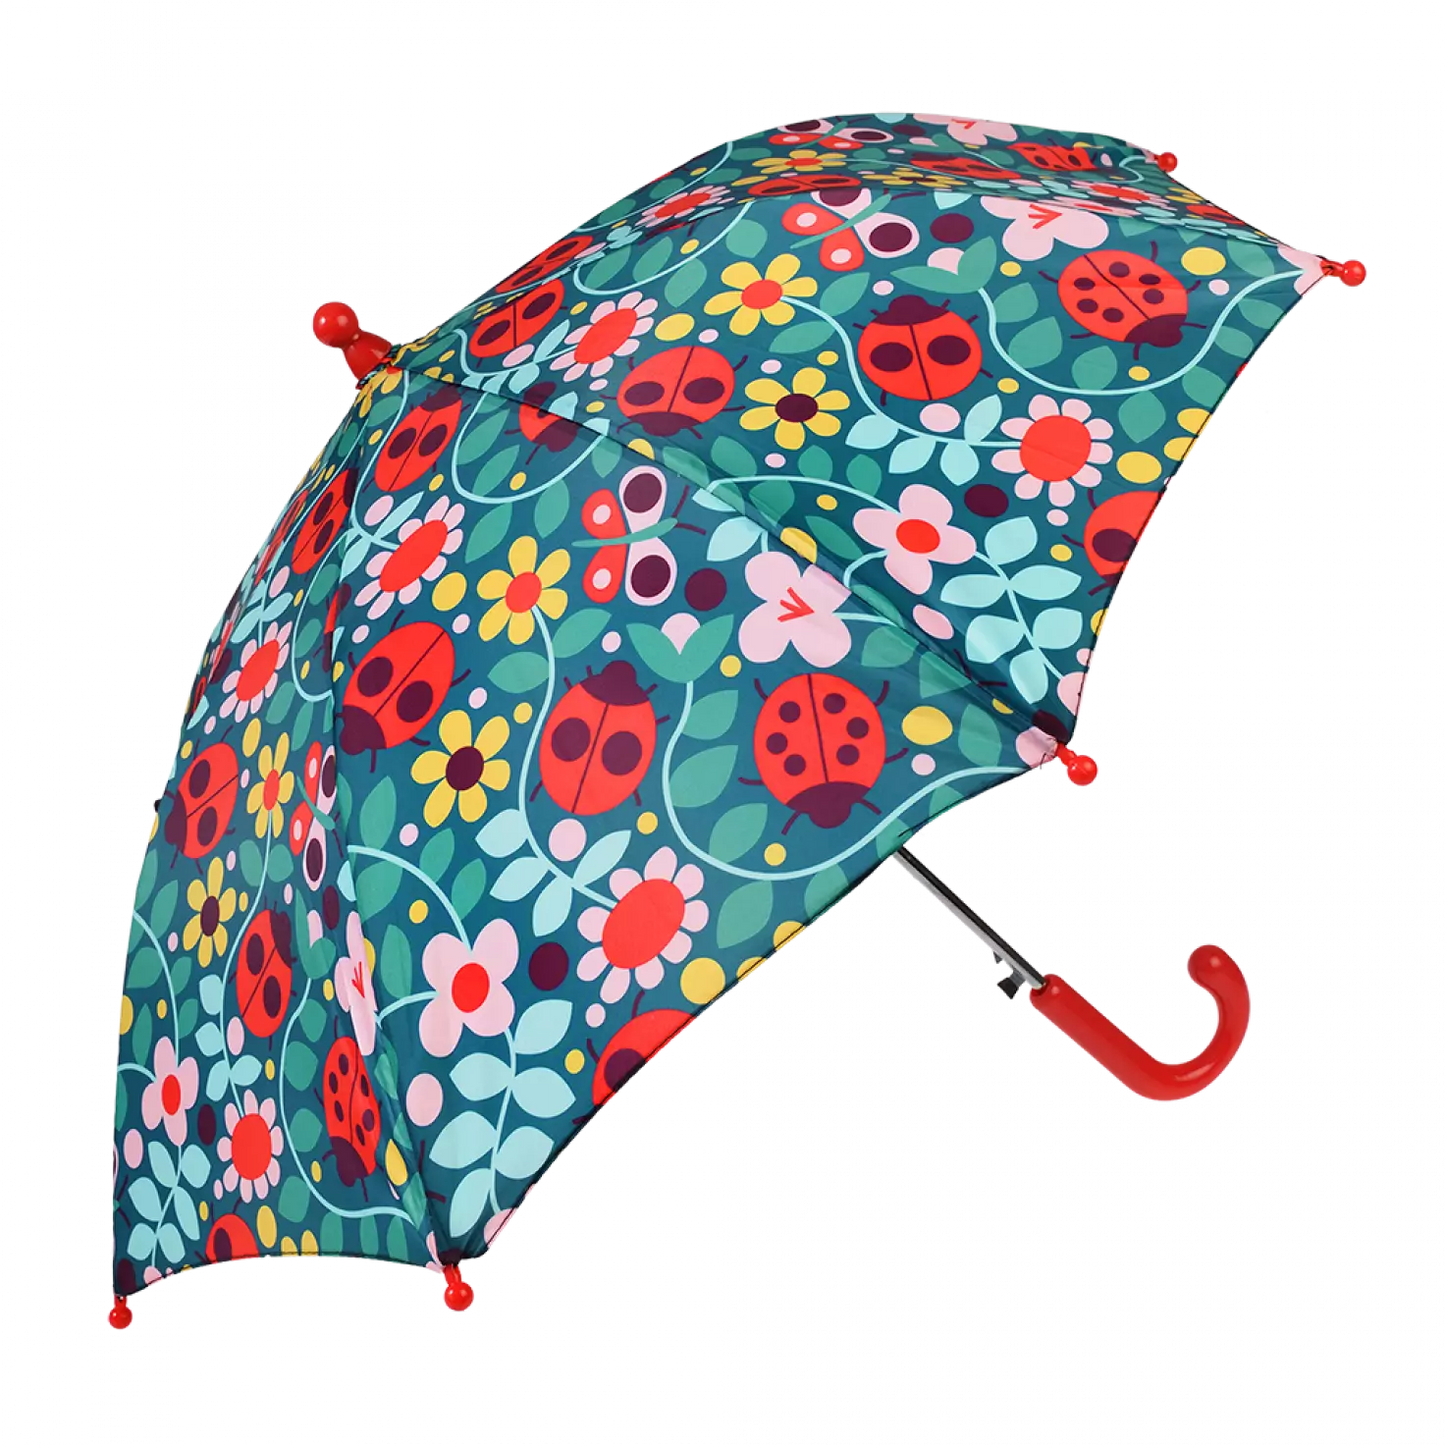 A childs umbrella by Rex London, style Ladybird, in blue with multi ladybird and floral print and red handle. Angled view of umbrella open.